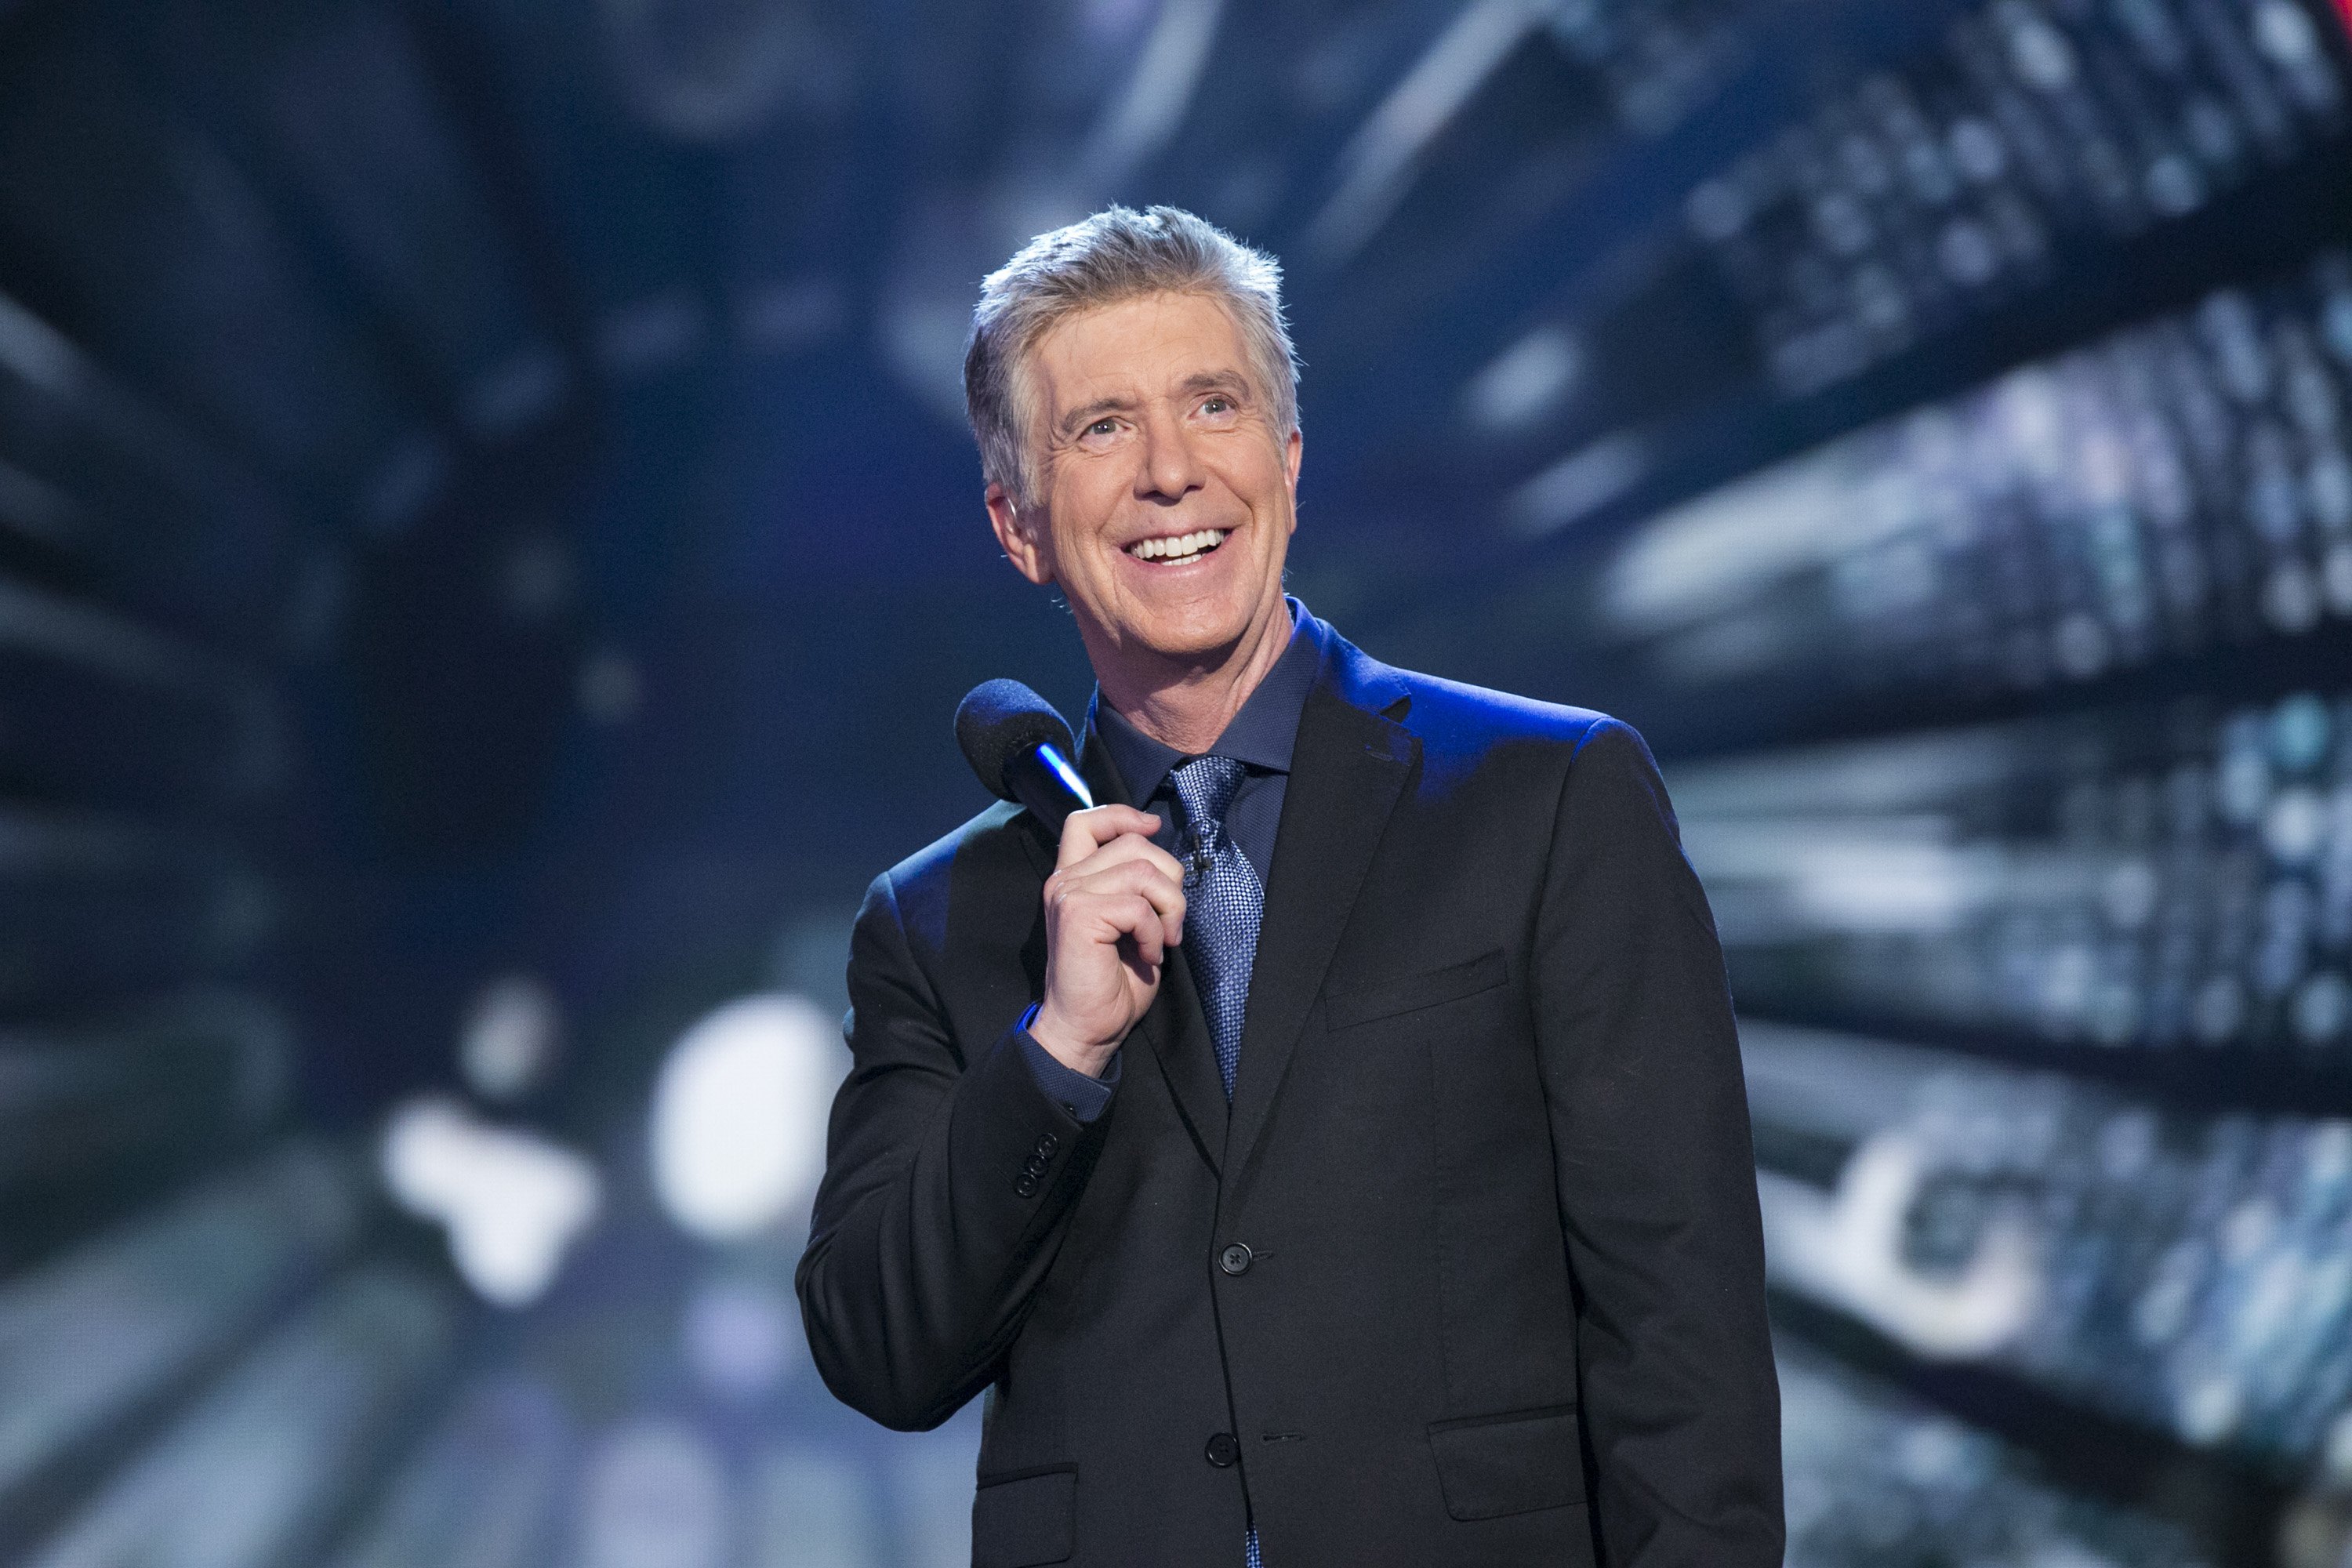 Tom Bergeron on ABC's "Dancing With the Stars" | Source: Getty Images